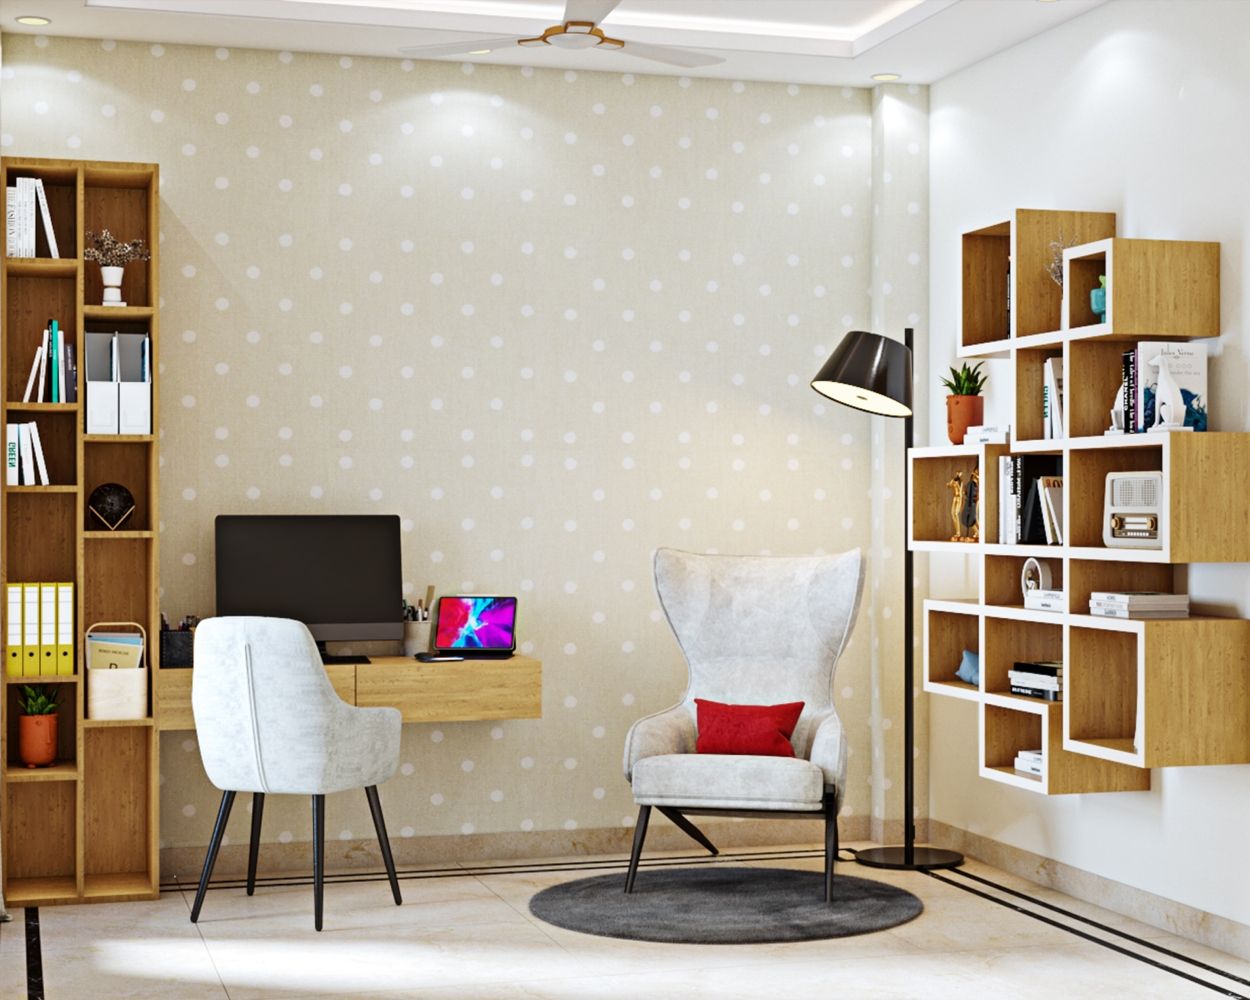 8 Best Study Room Ideas for College From Home - Decorilla